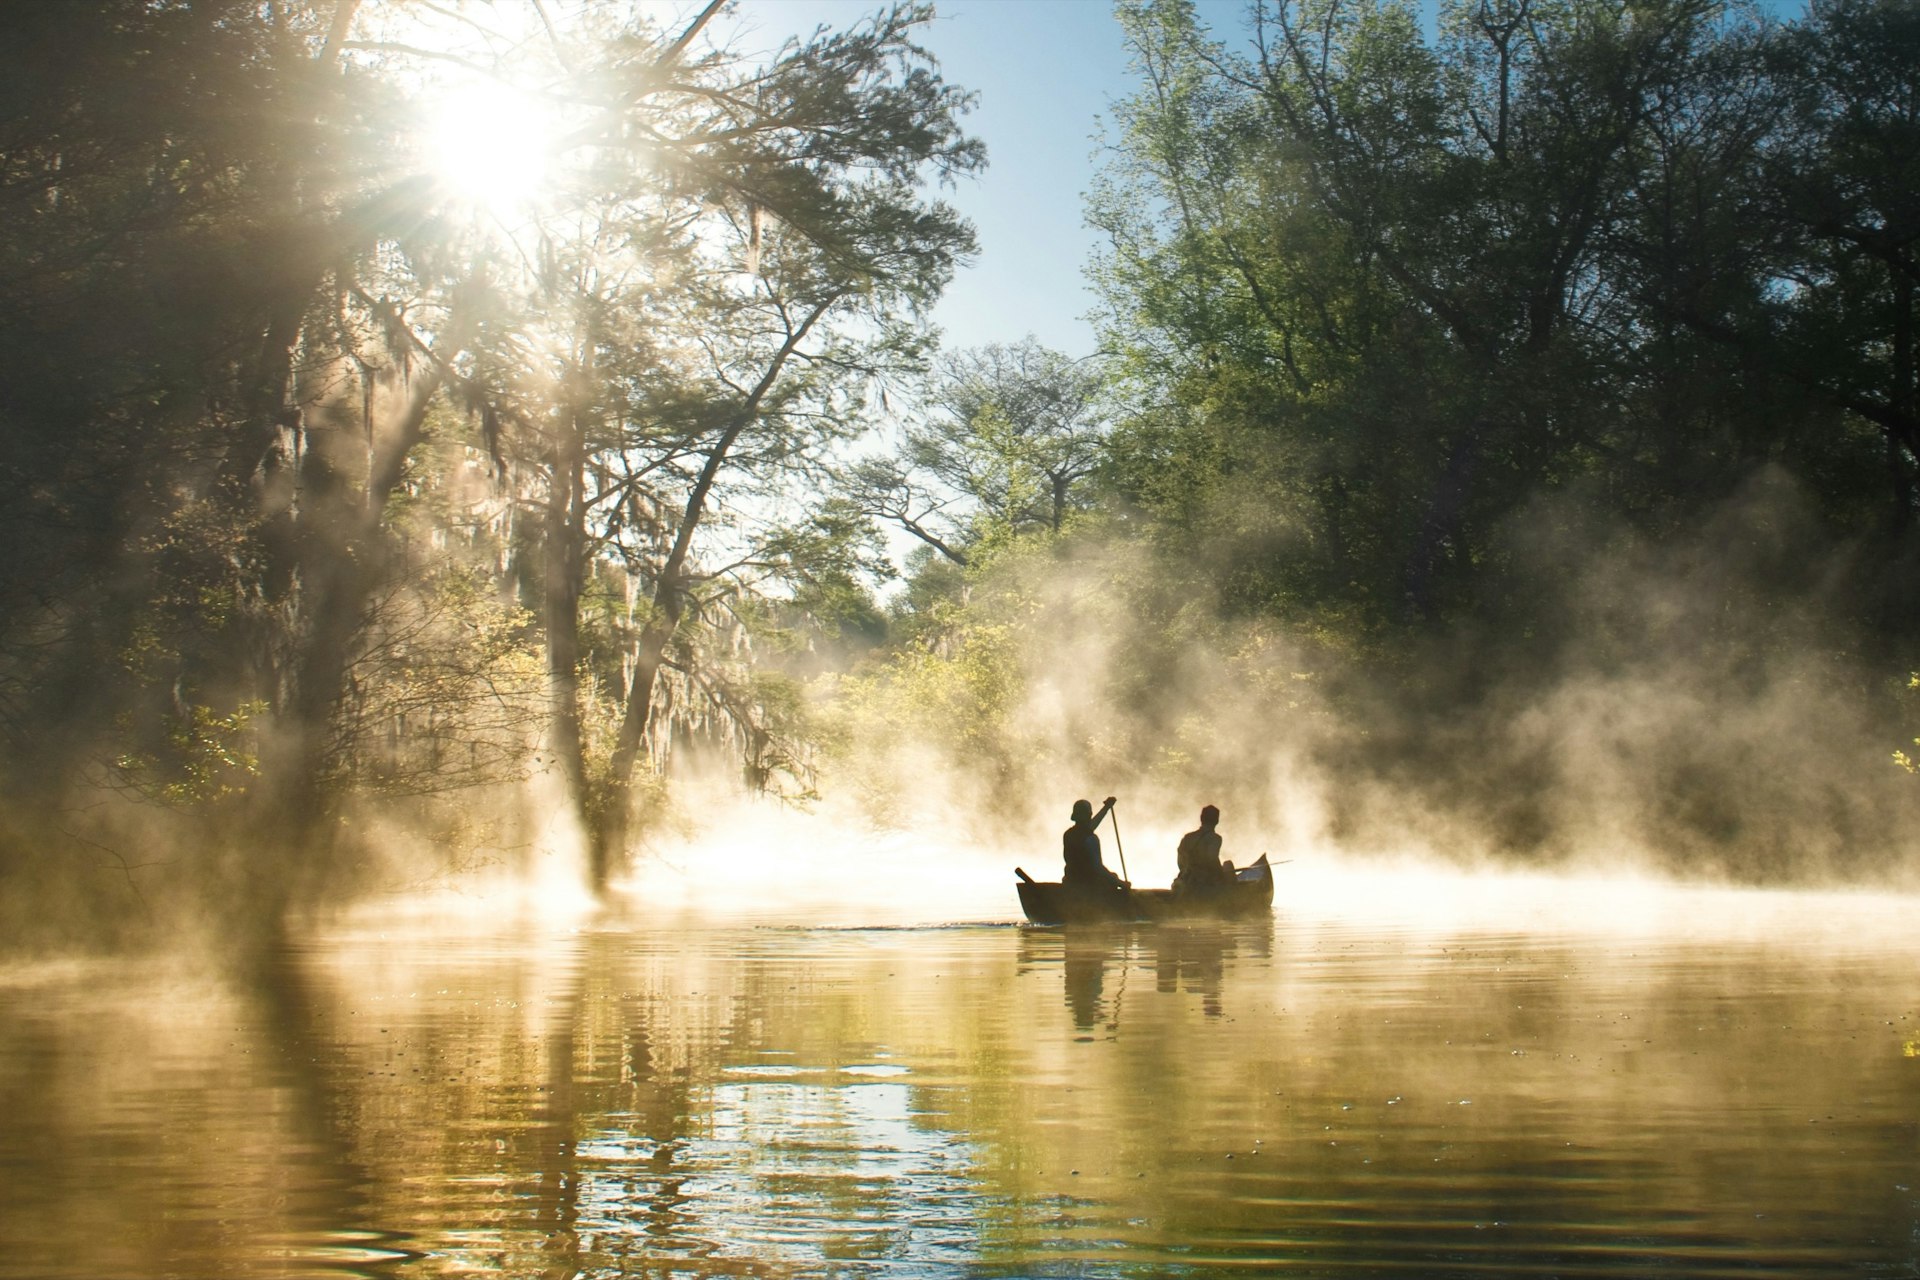 People paddle in kayaks in the Everglades, as mist rises around them